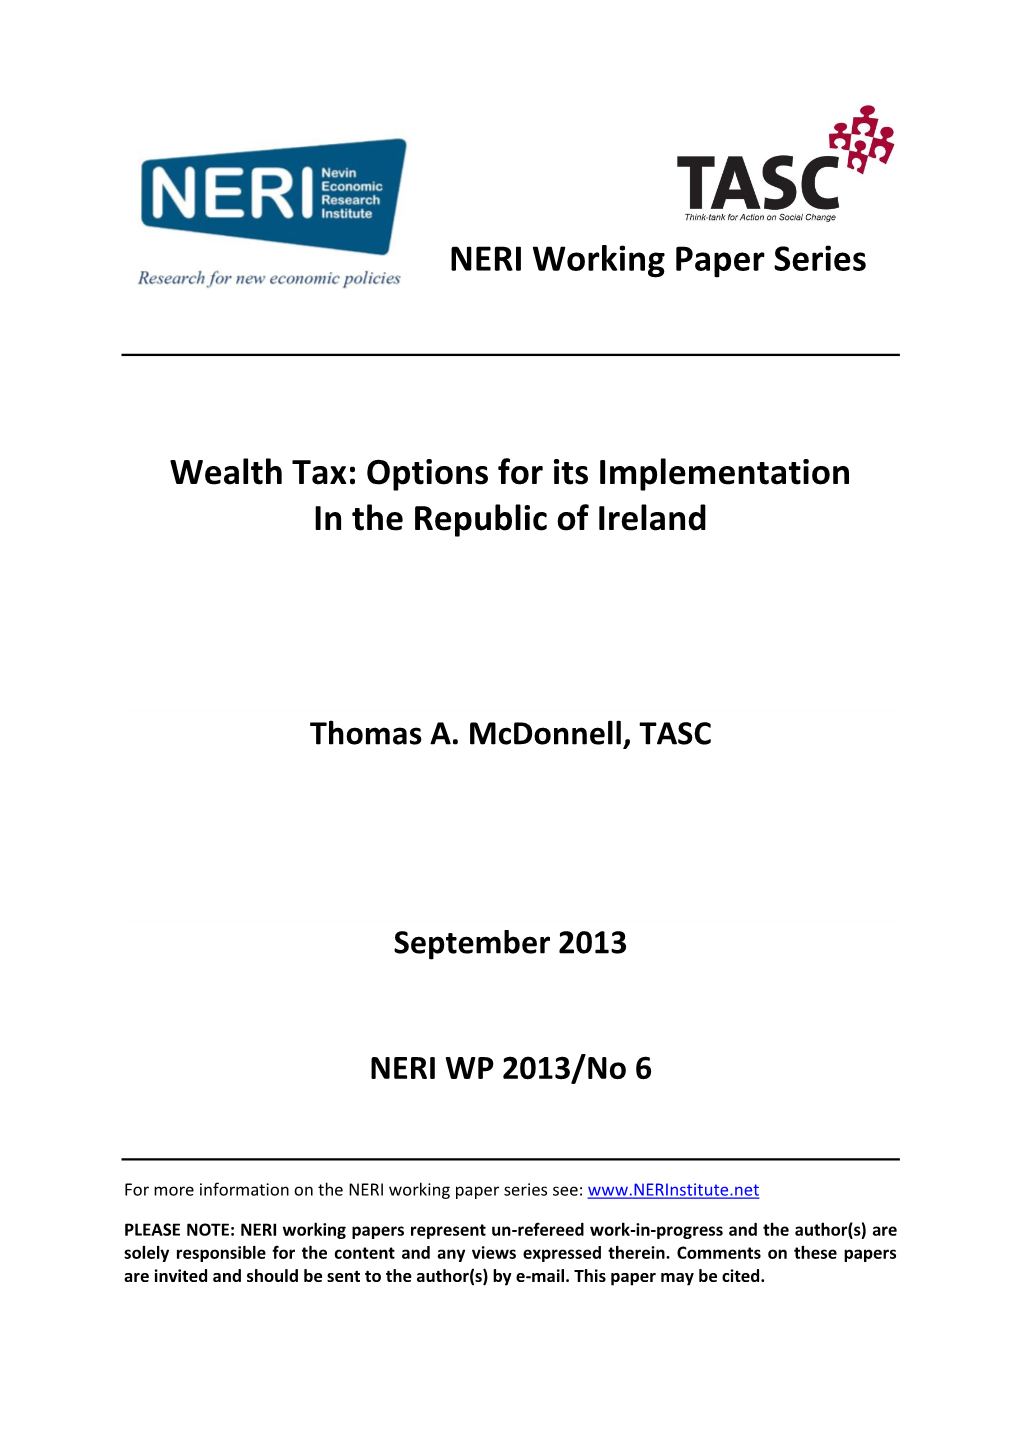 NERI Working Paper Series Wealth Tax: Options for Its Implementation